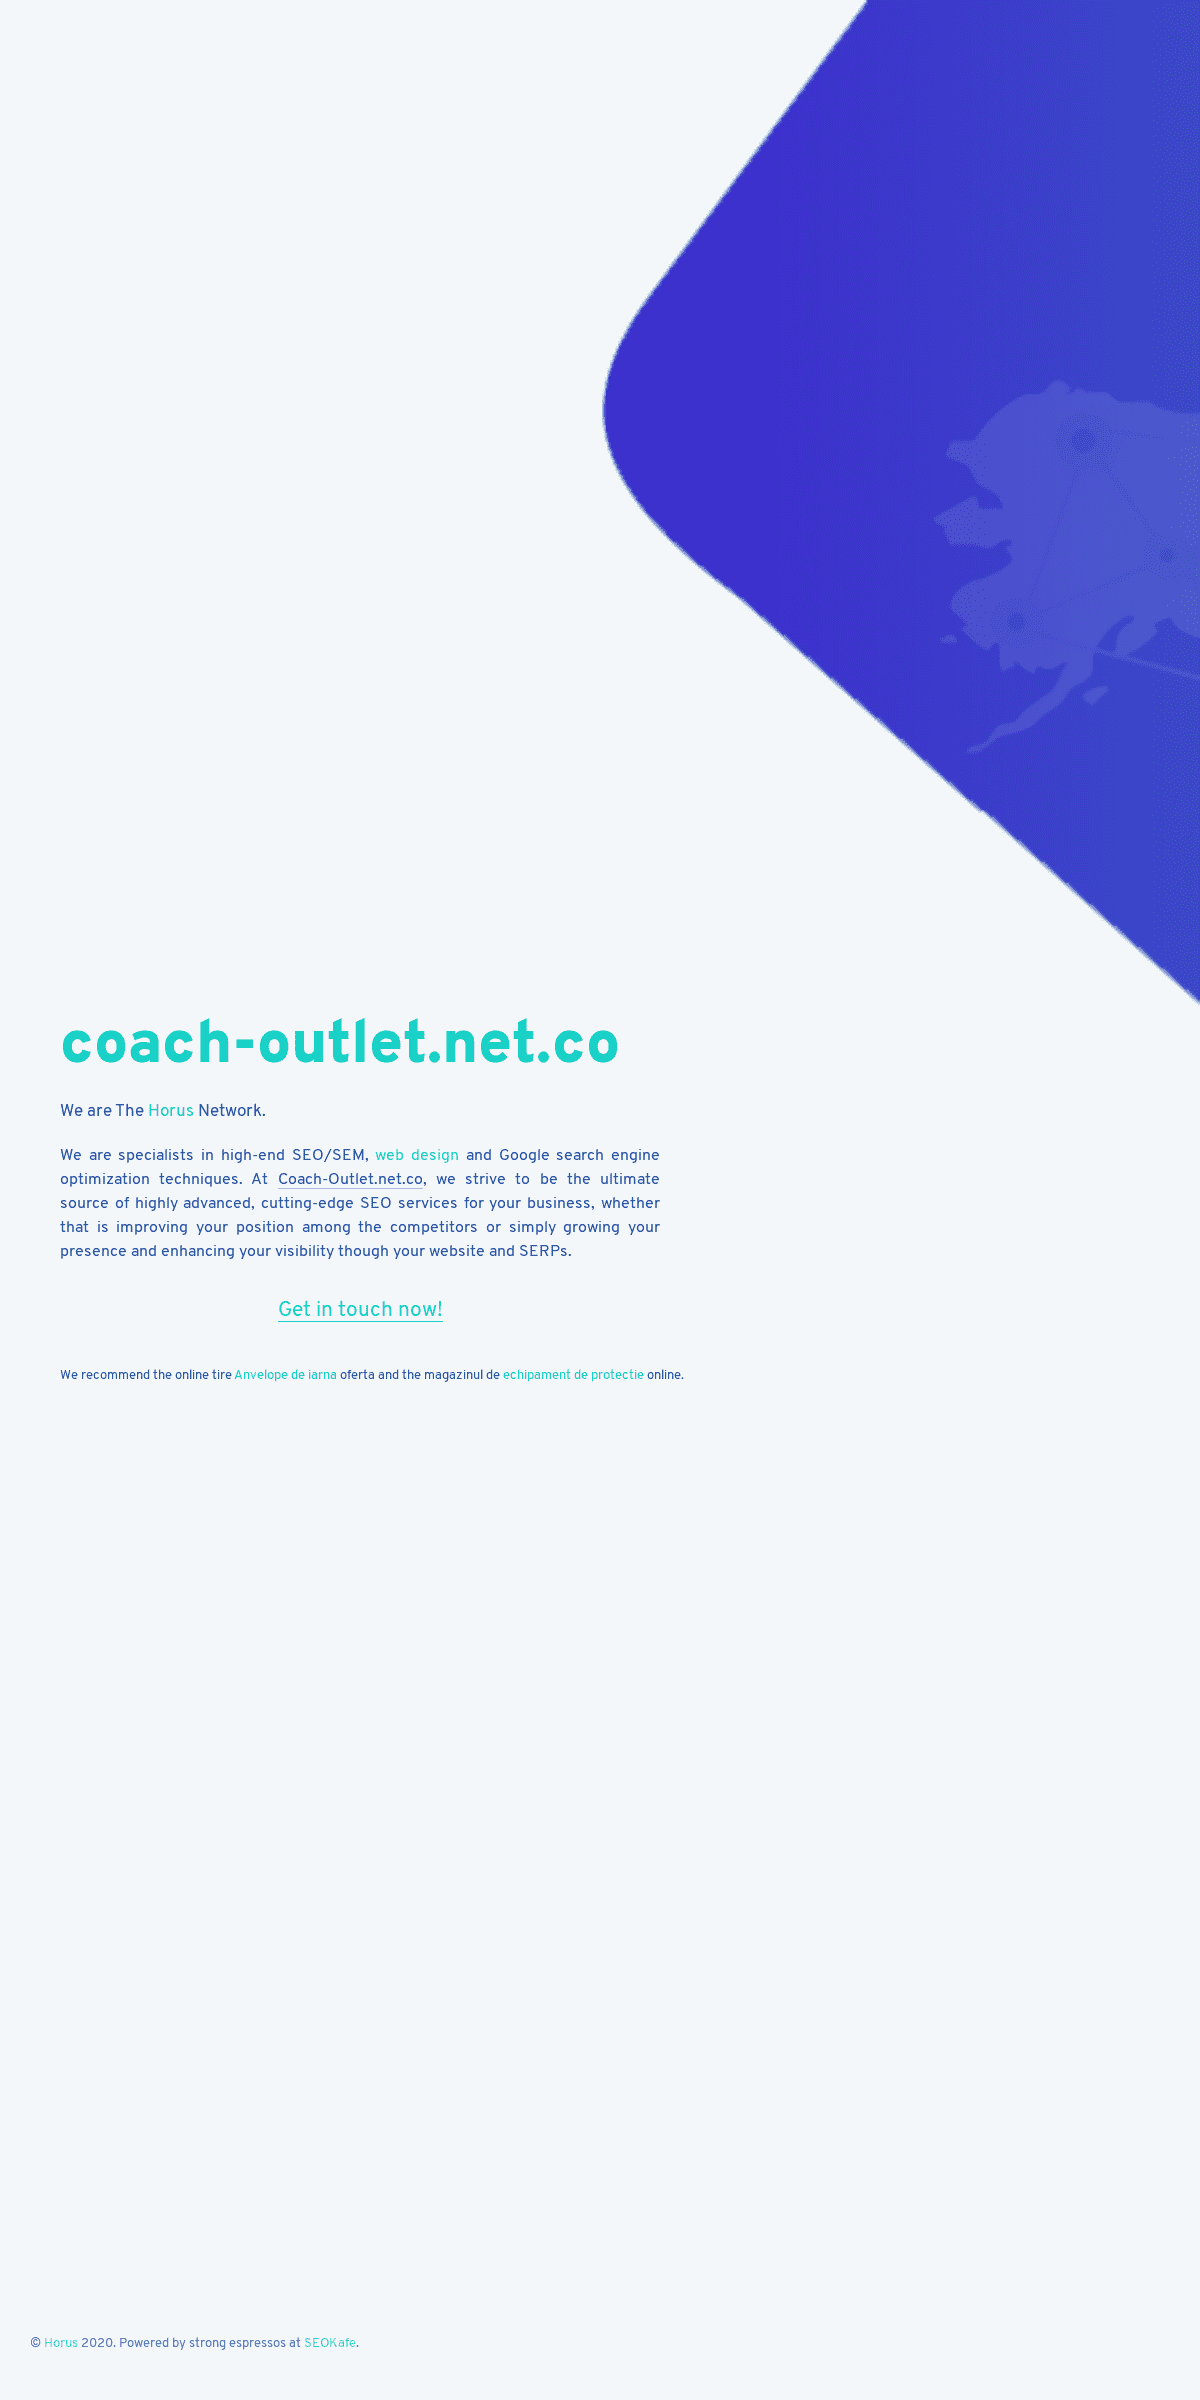 A complete backup of coach-outlet.net.co